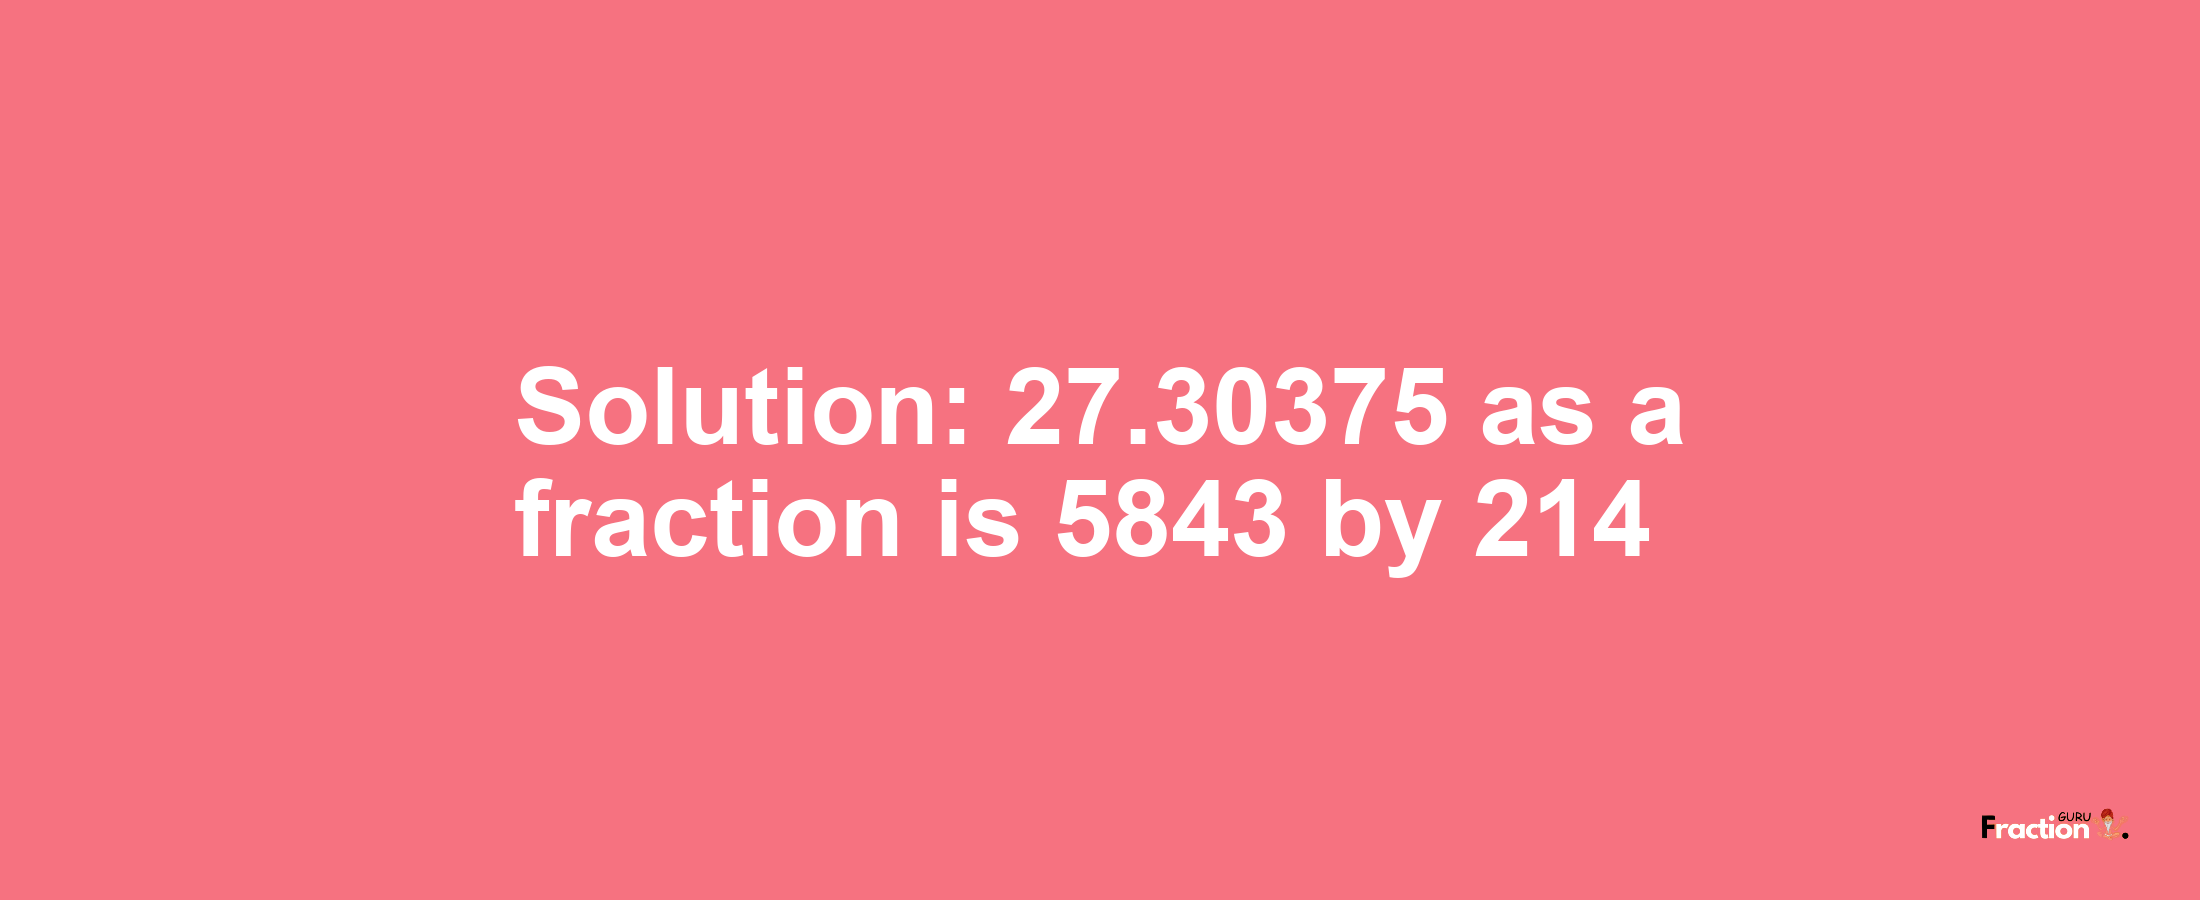 Solution:27.30375 as a fraction is 5843/214